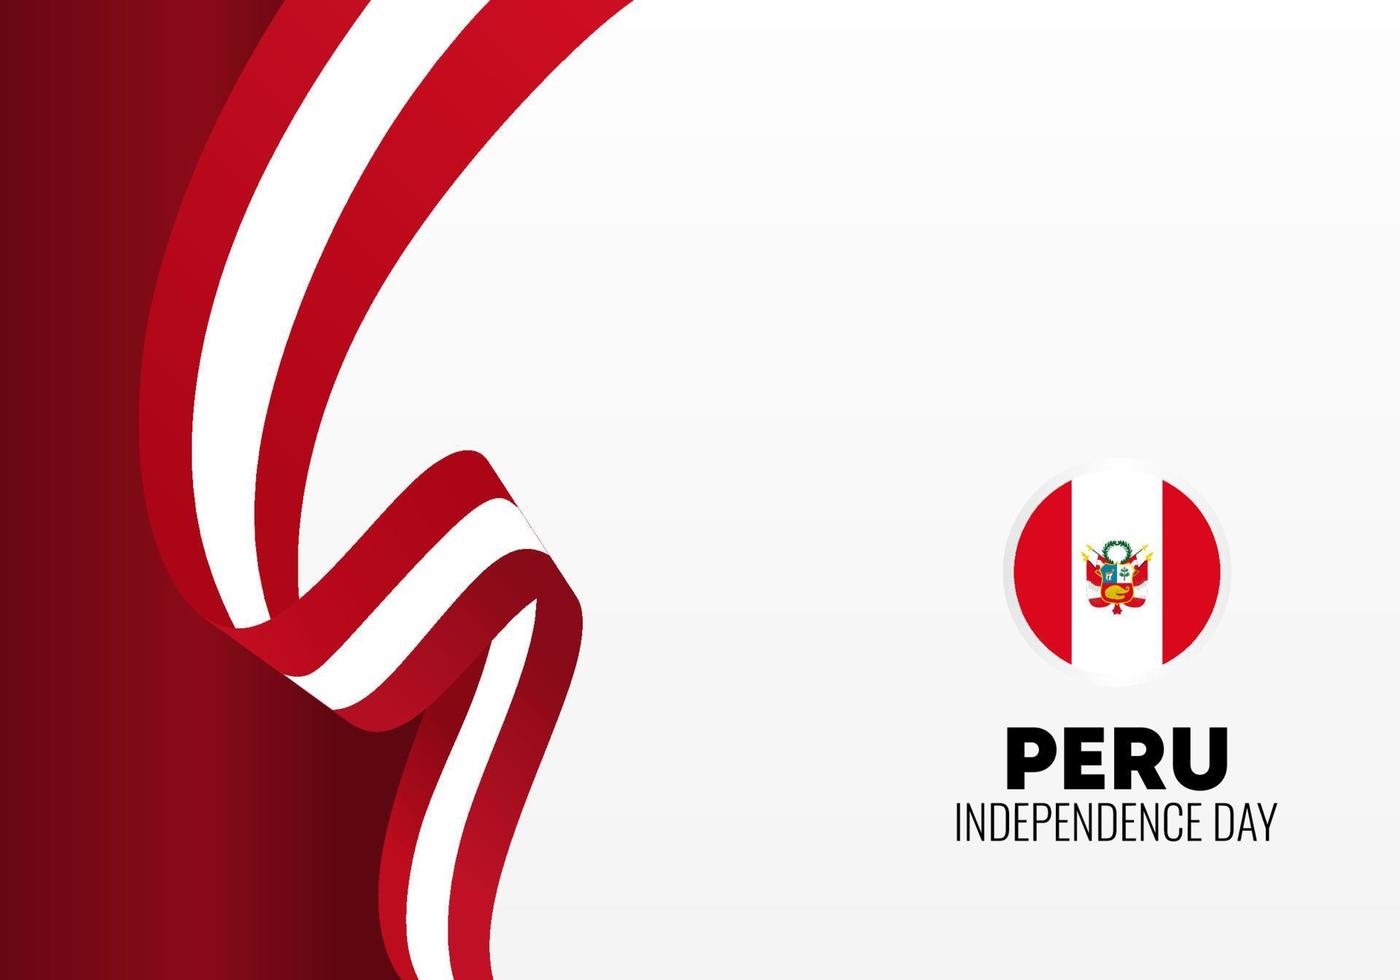 Peru independence day for national celebration on July 28 th. vector